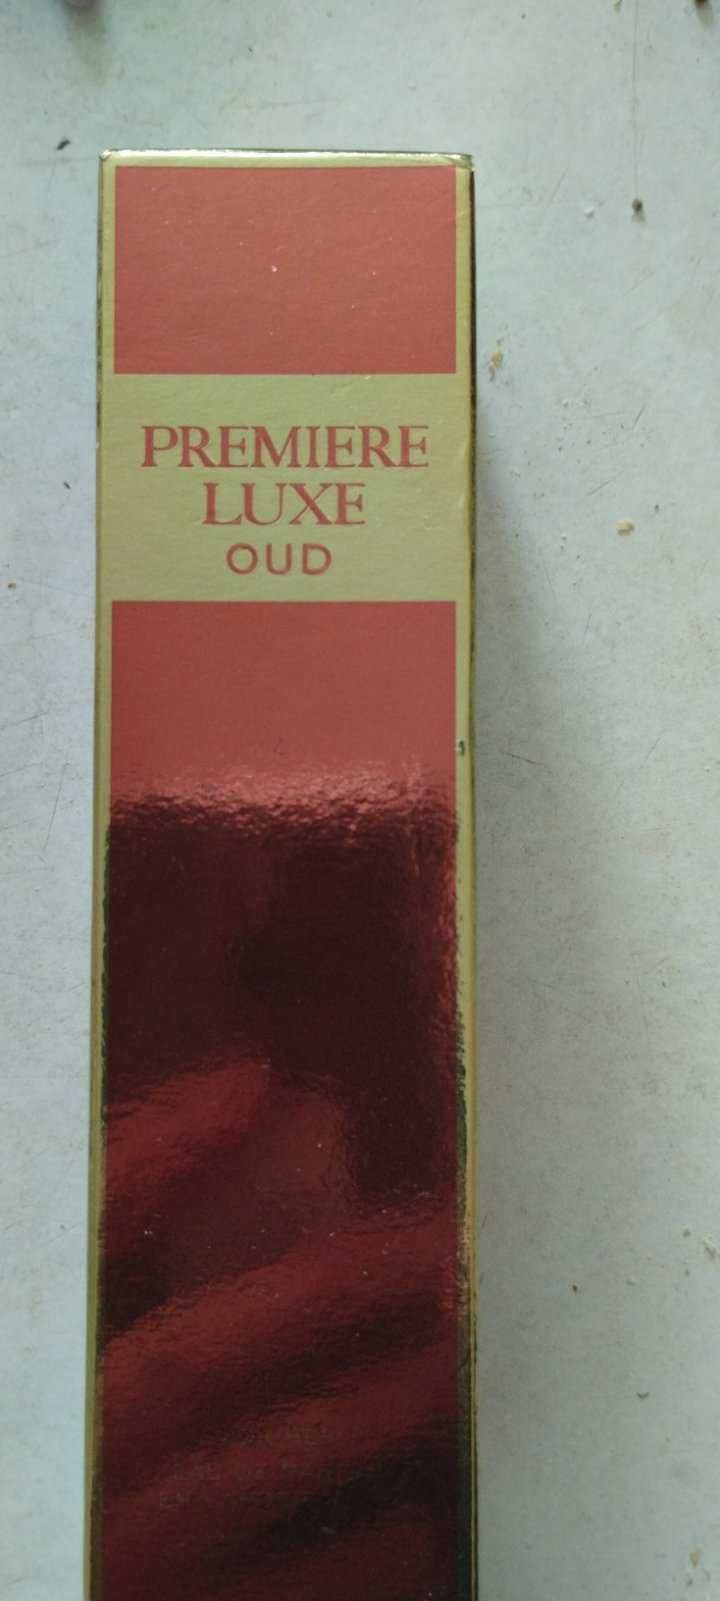 Premiere Luxe Oud for Her